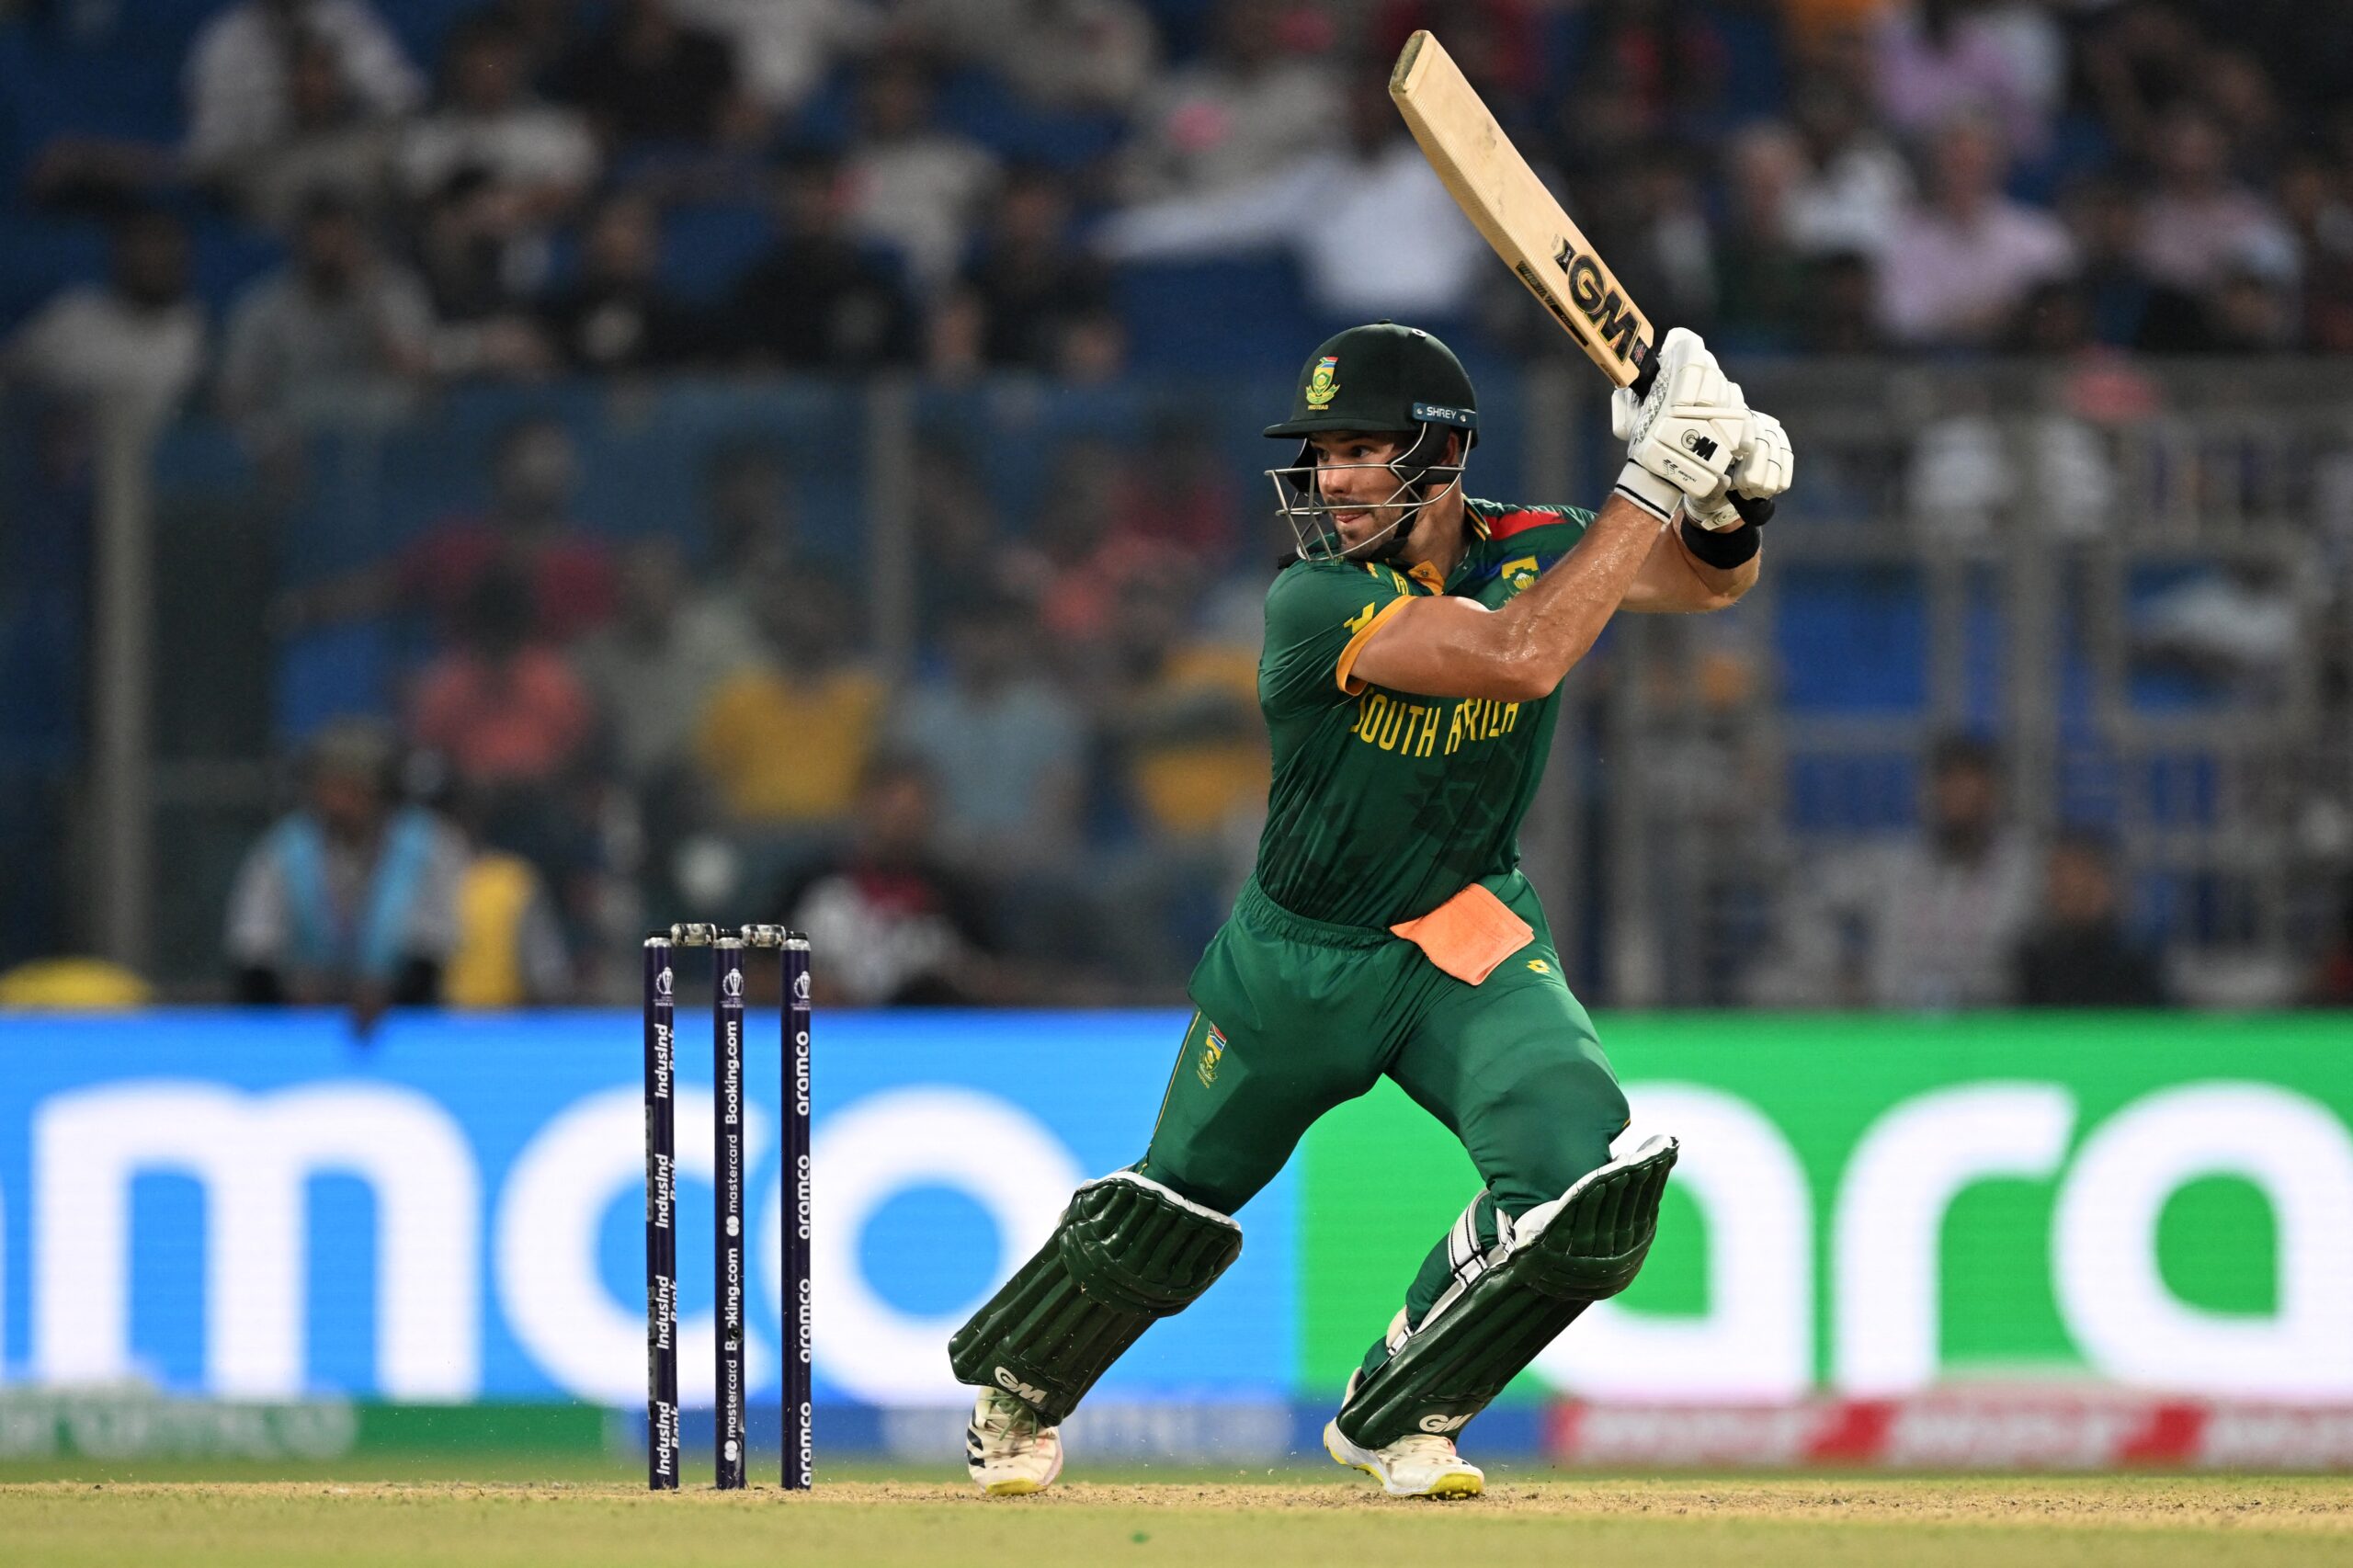 South Africa Becomes 1st Team Ever To Achieve Sensational Feat In Cricket World Cup History